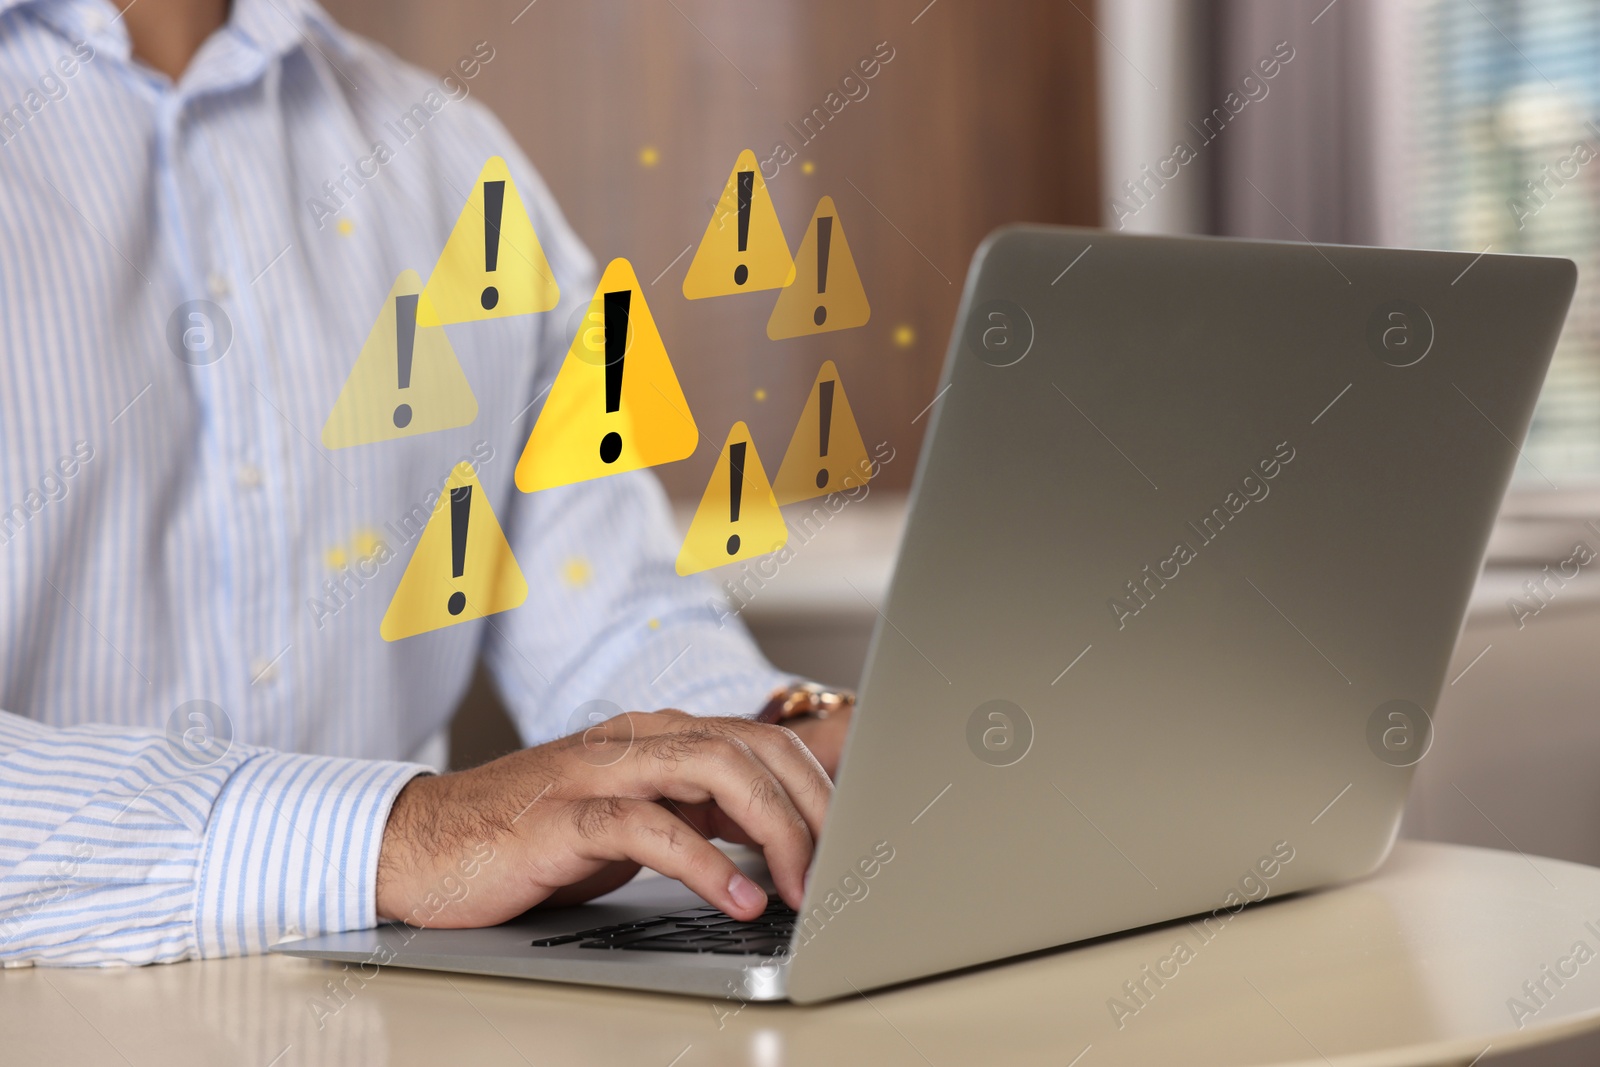 Image of Man using laptop at table, closeup. Warning signs for spam messages above device